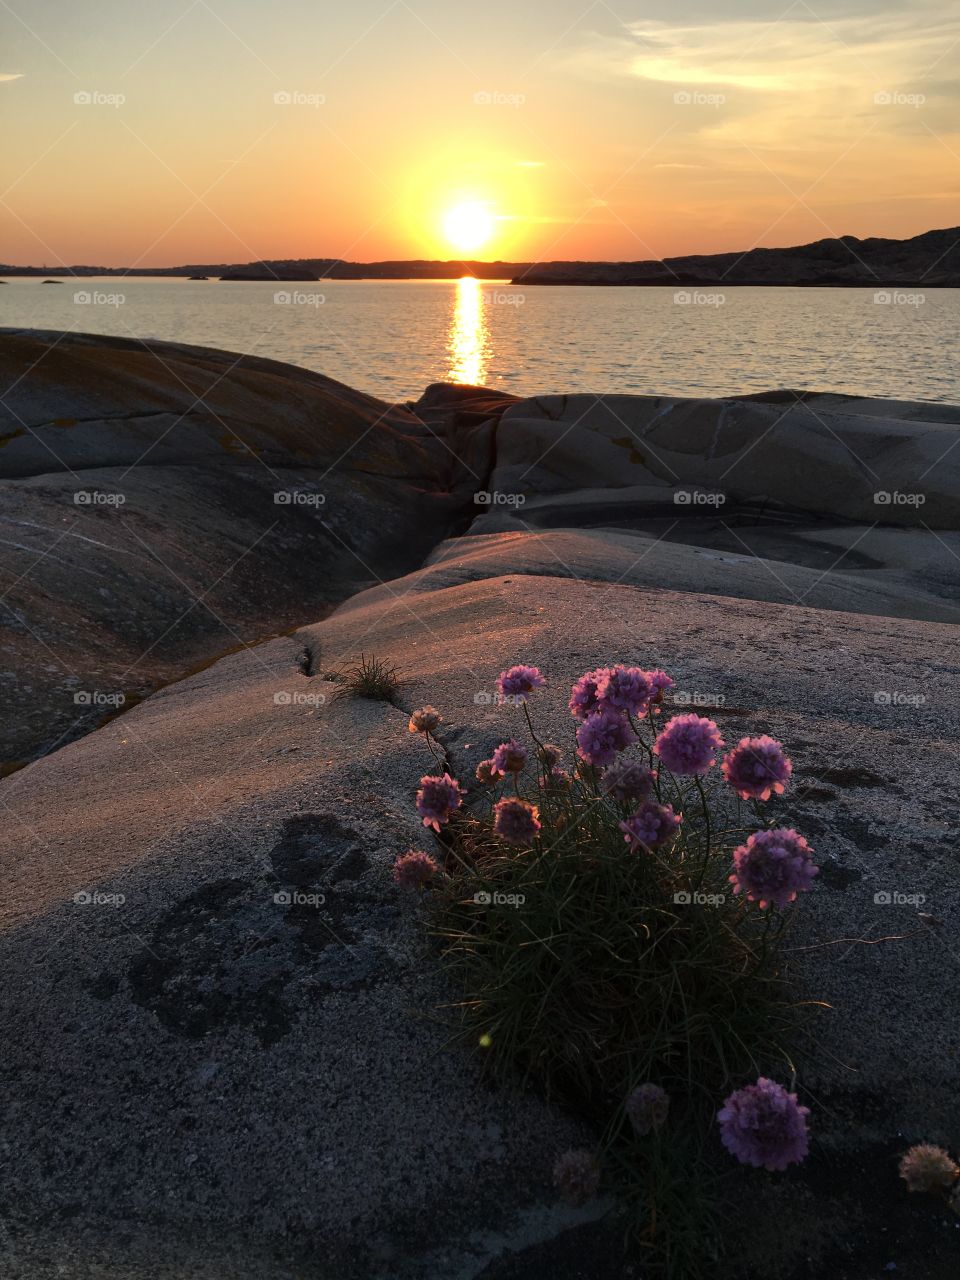 View of flowers in front of sea at sunset